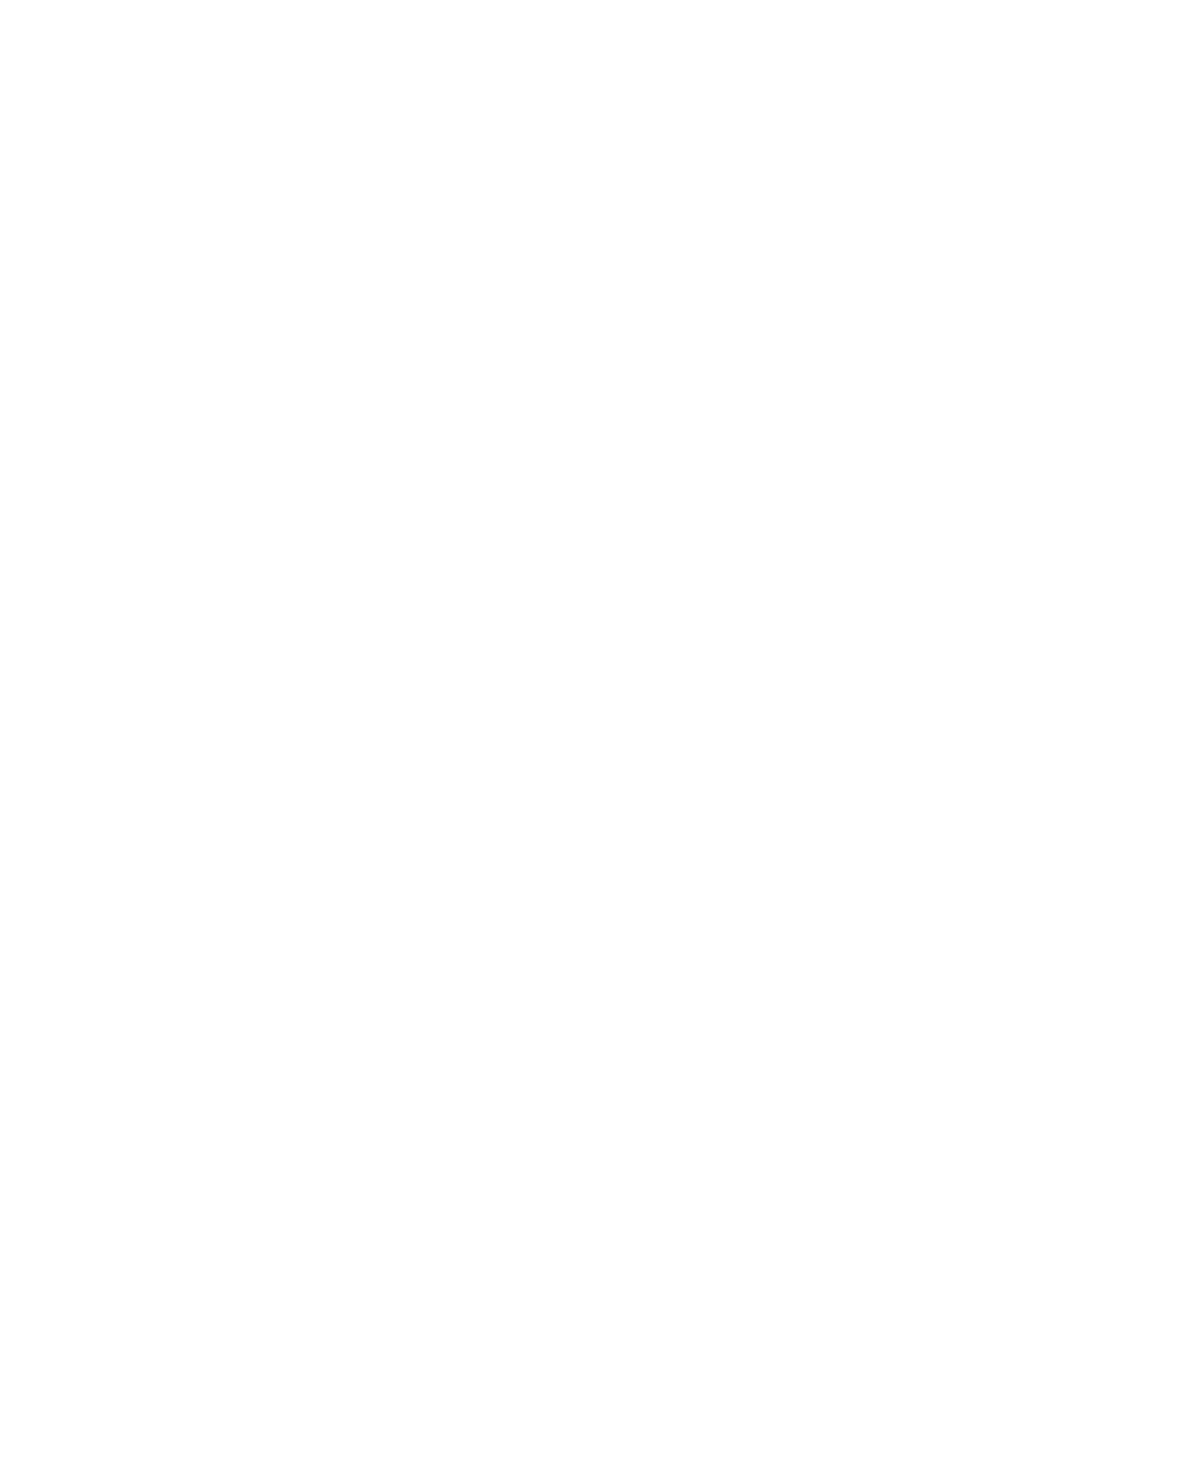 MUSCAT BAILEY A 2022 マスカット・ベーリー A 2022